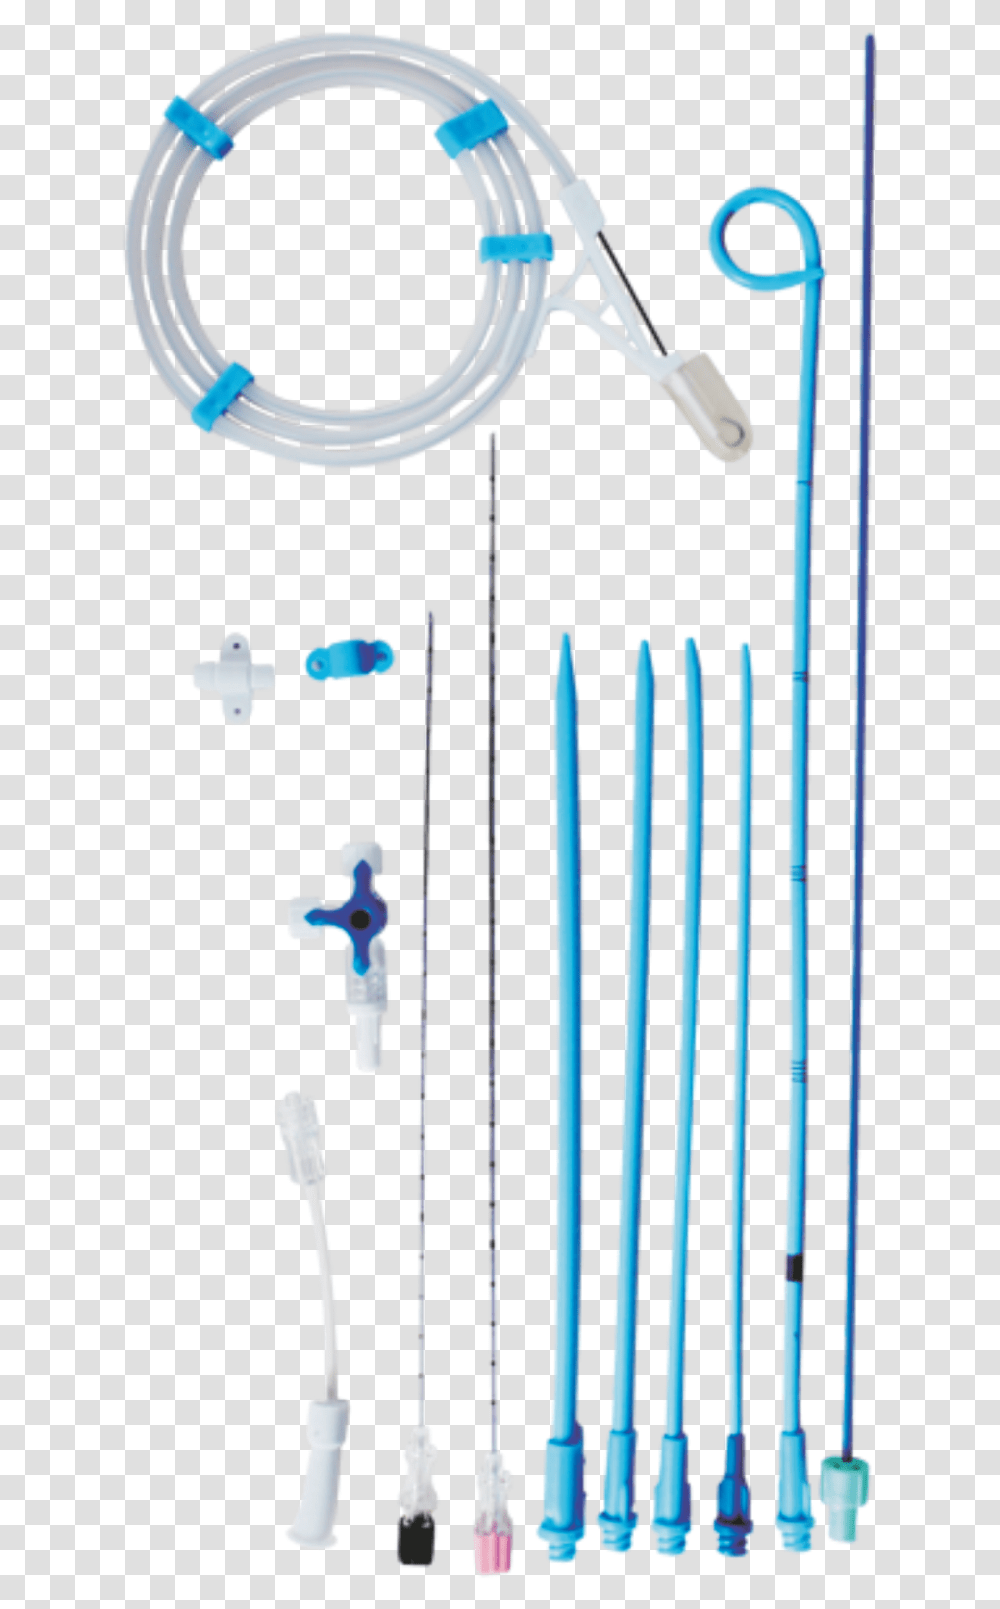 Liver Abscess Drainage Catheter, Shower Faucet, Weapon, Weaponry Transparent Png